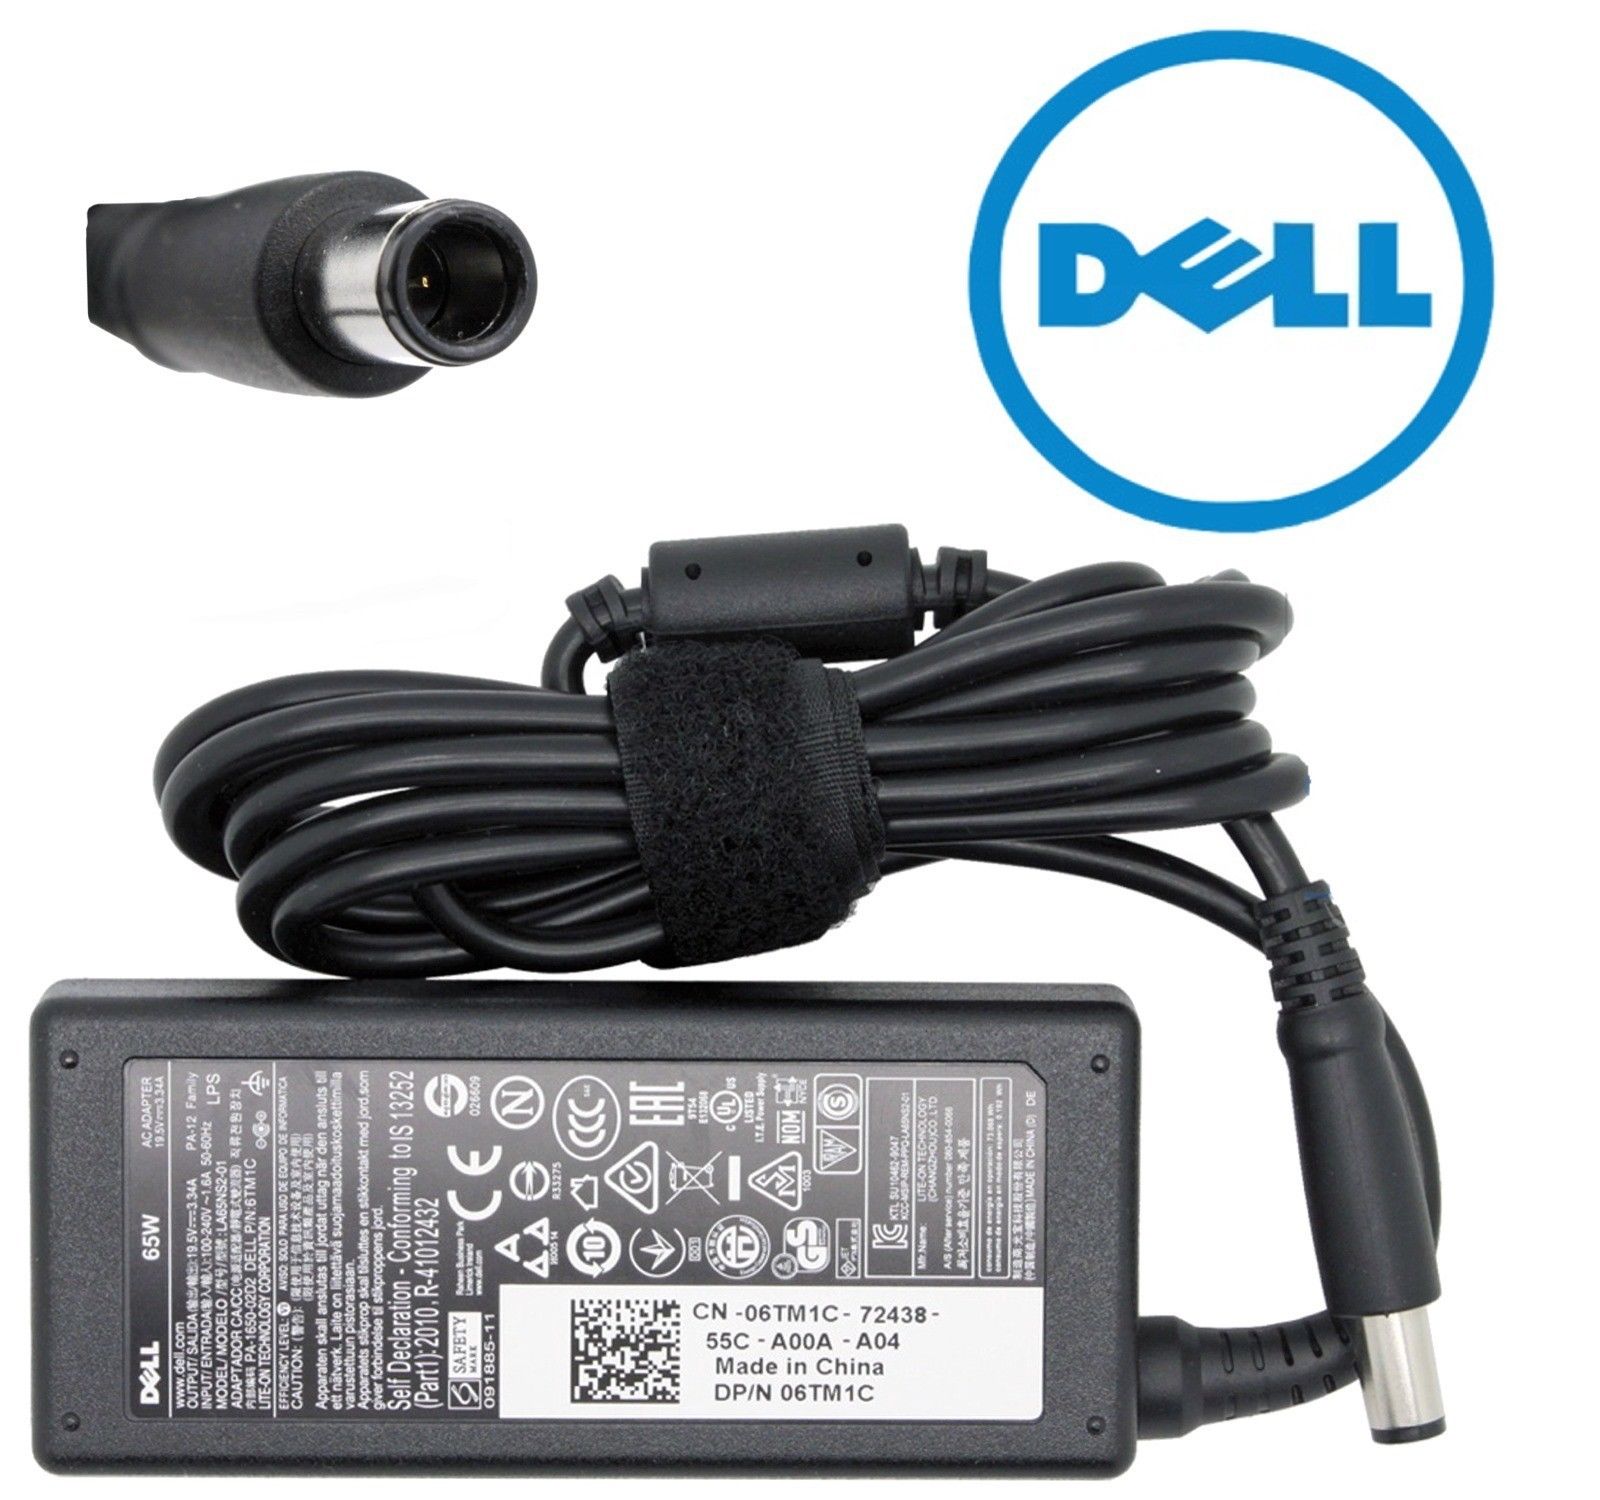 Buy Dell 65W Adapter 6TM1C WithOut Power Cord ONLY BOX OPEN Online